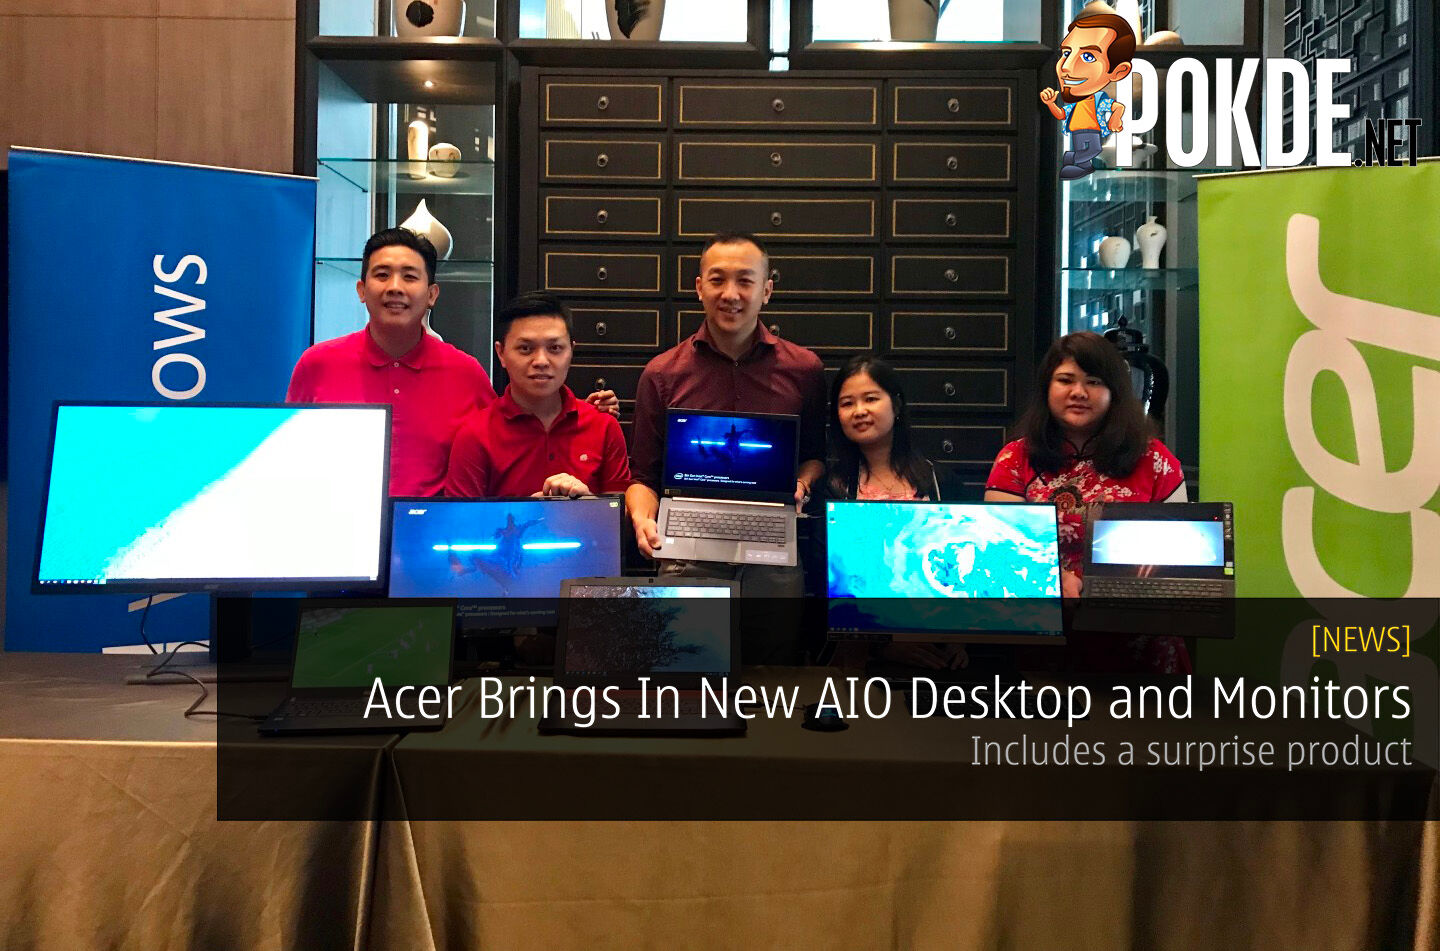 Acer Brings In New AIO Desktop and Monitors - Includes a surprise product 40